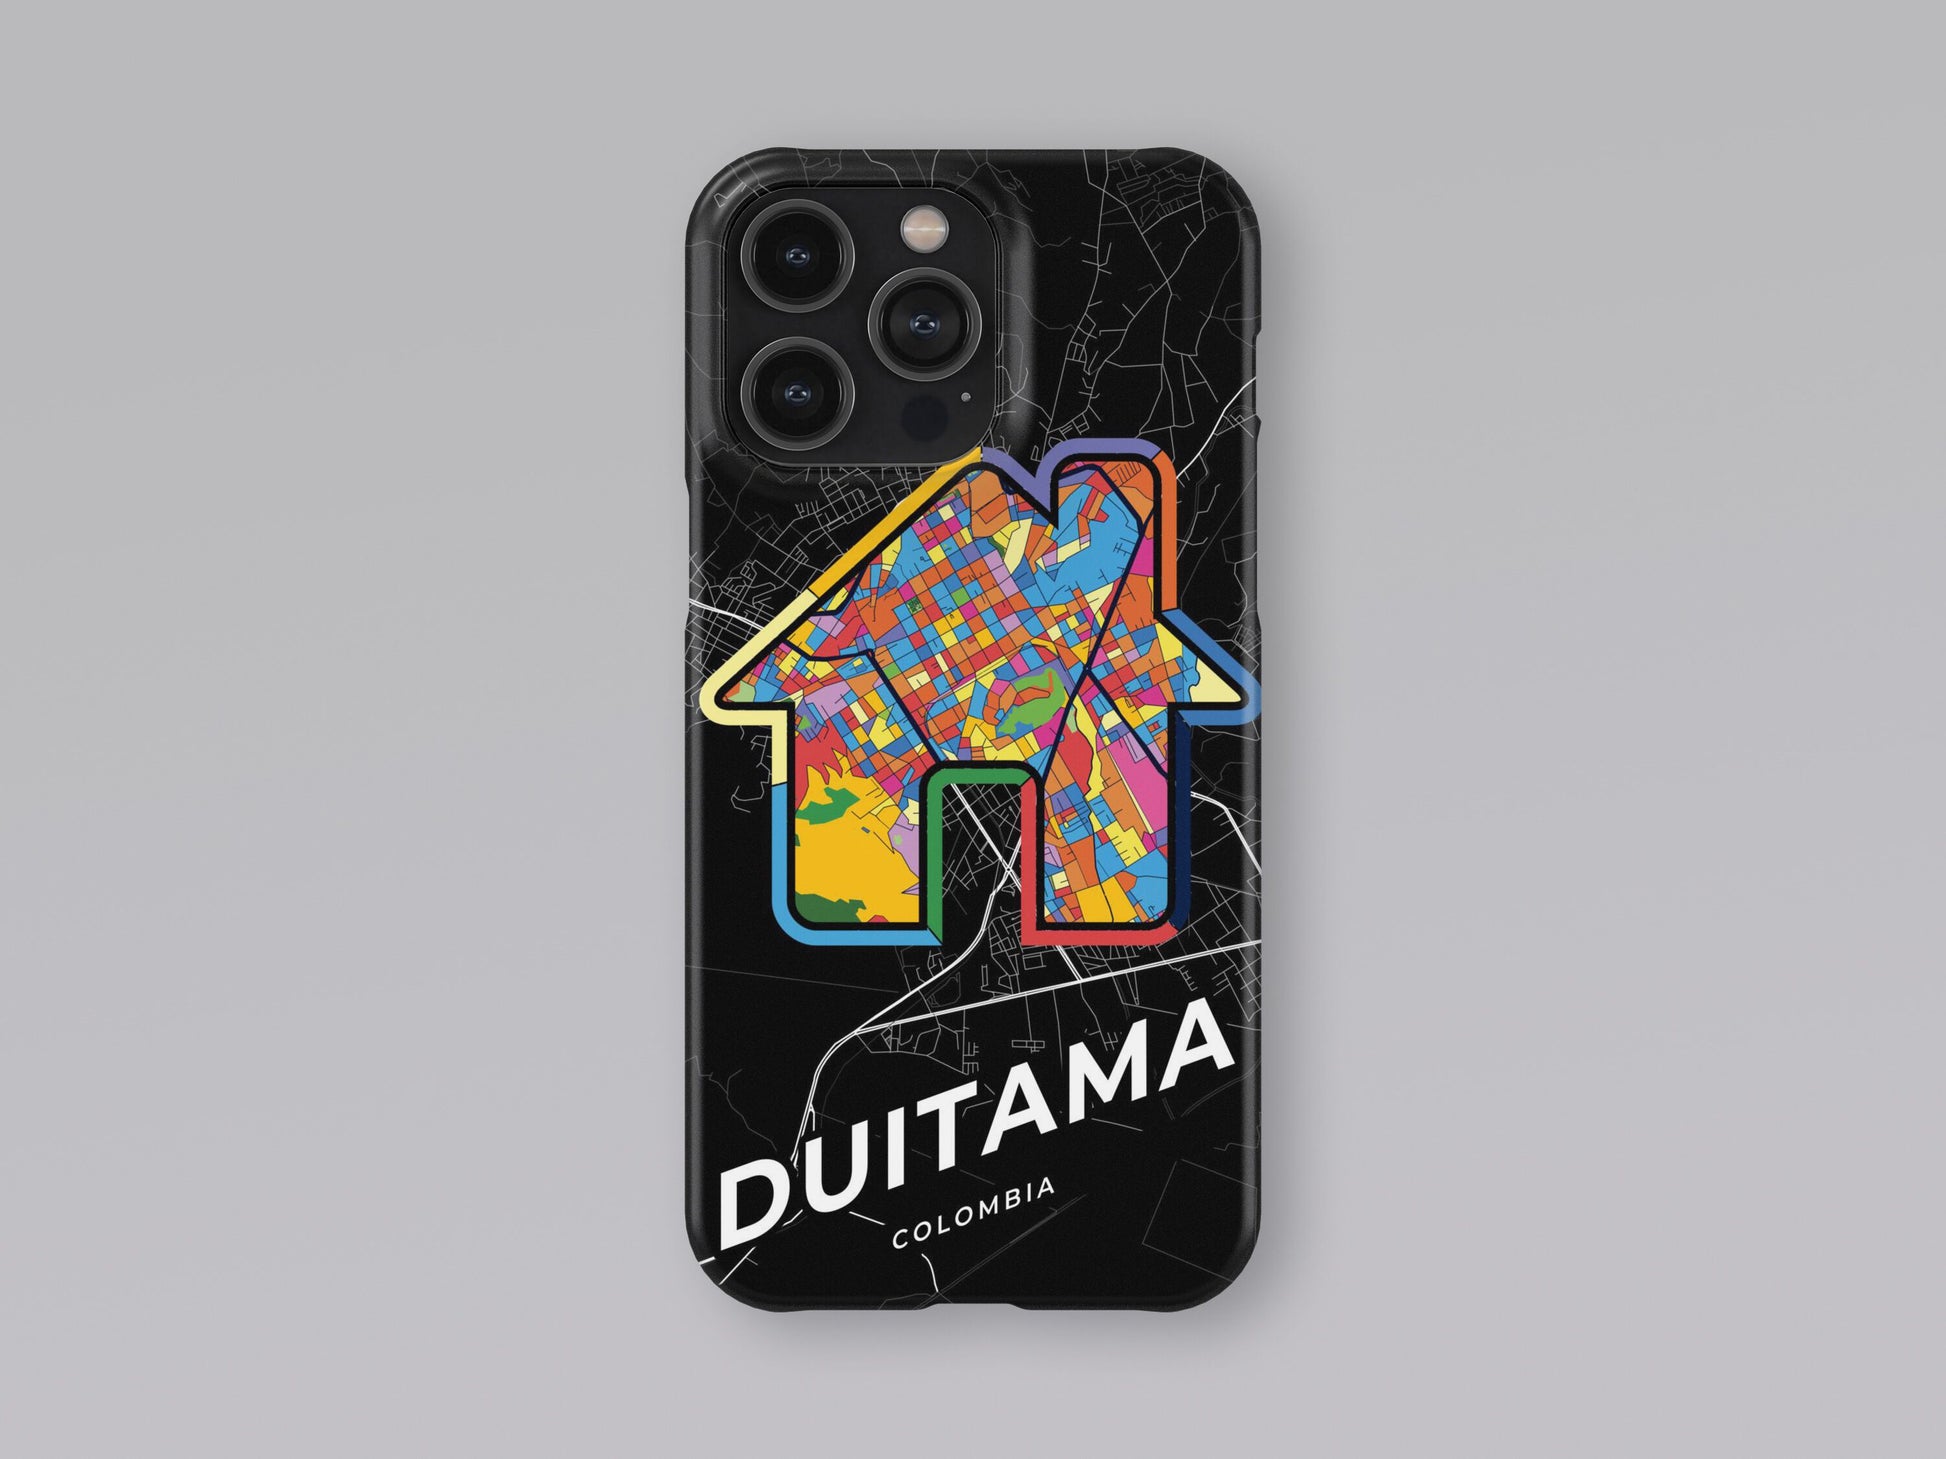 Duitama Colombia slim phone case with colorful icon. Birthday, wedding or housewarming gift. Couple match cases. 3